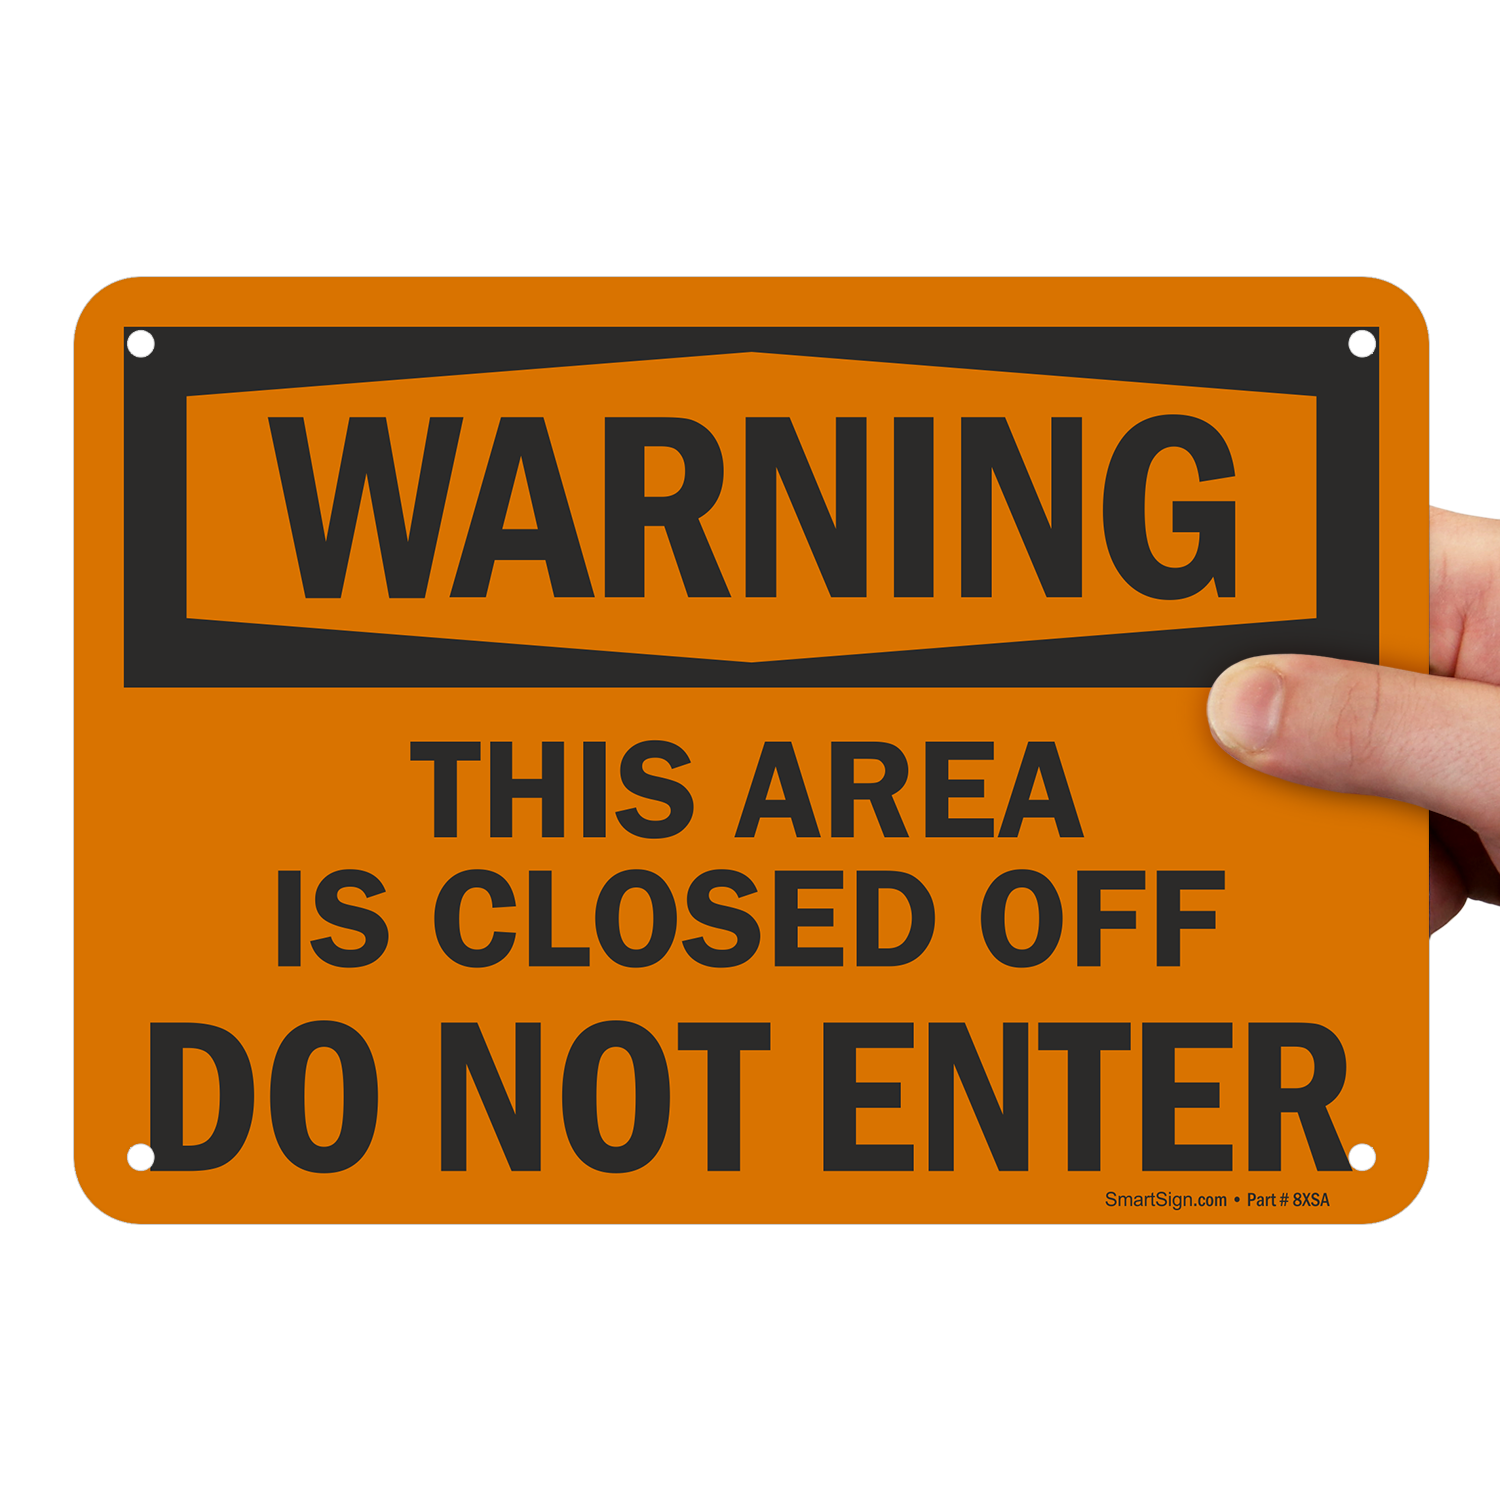 Closed area. Closed off. Warning close the Door.